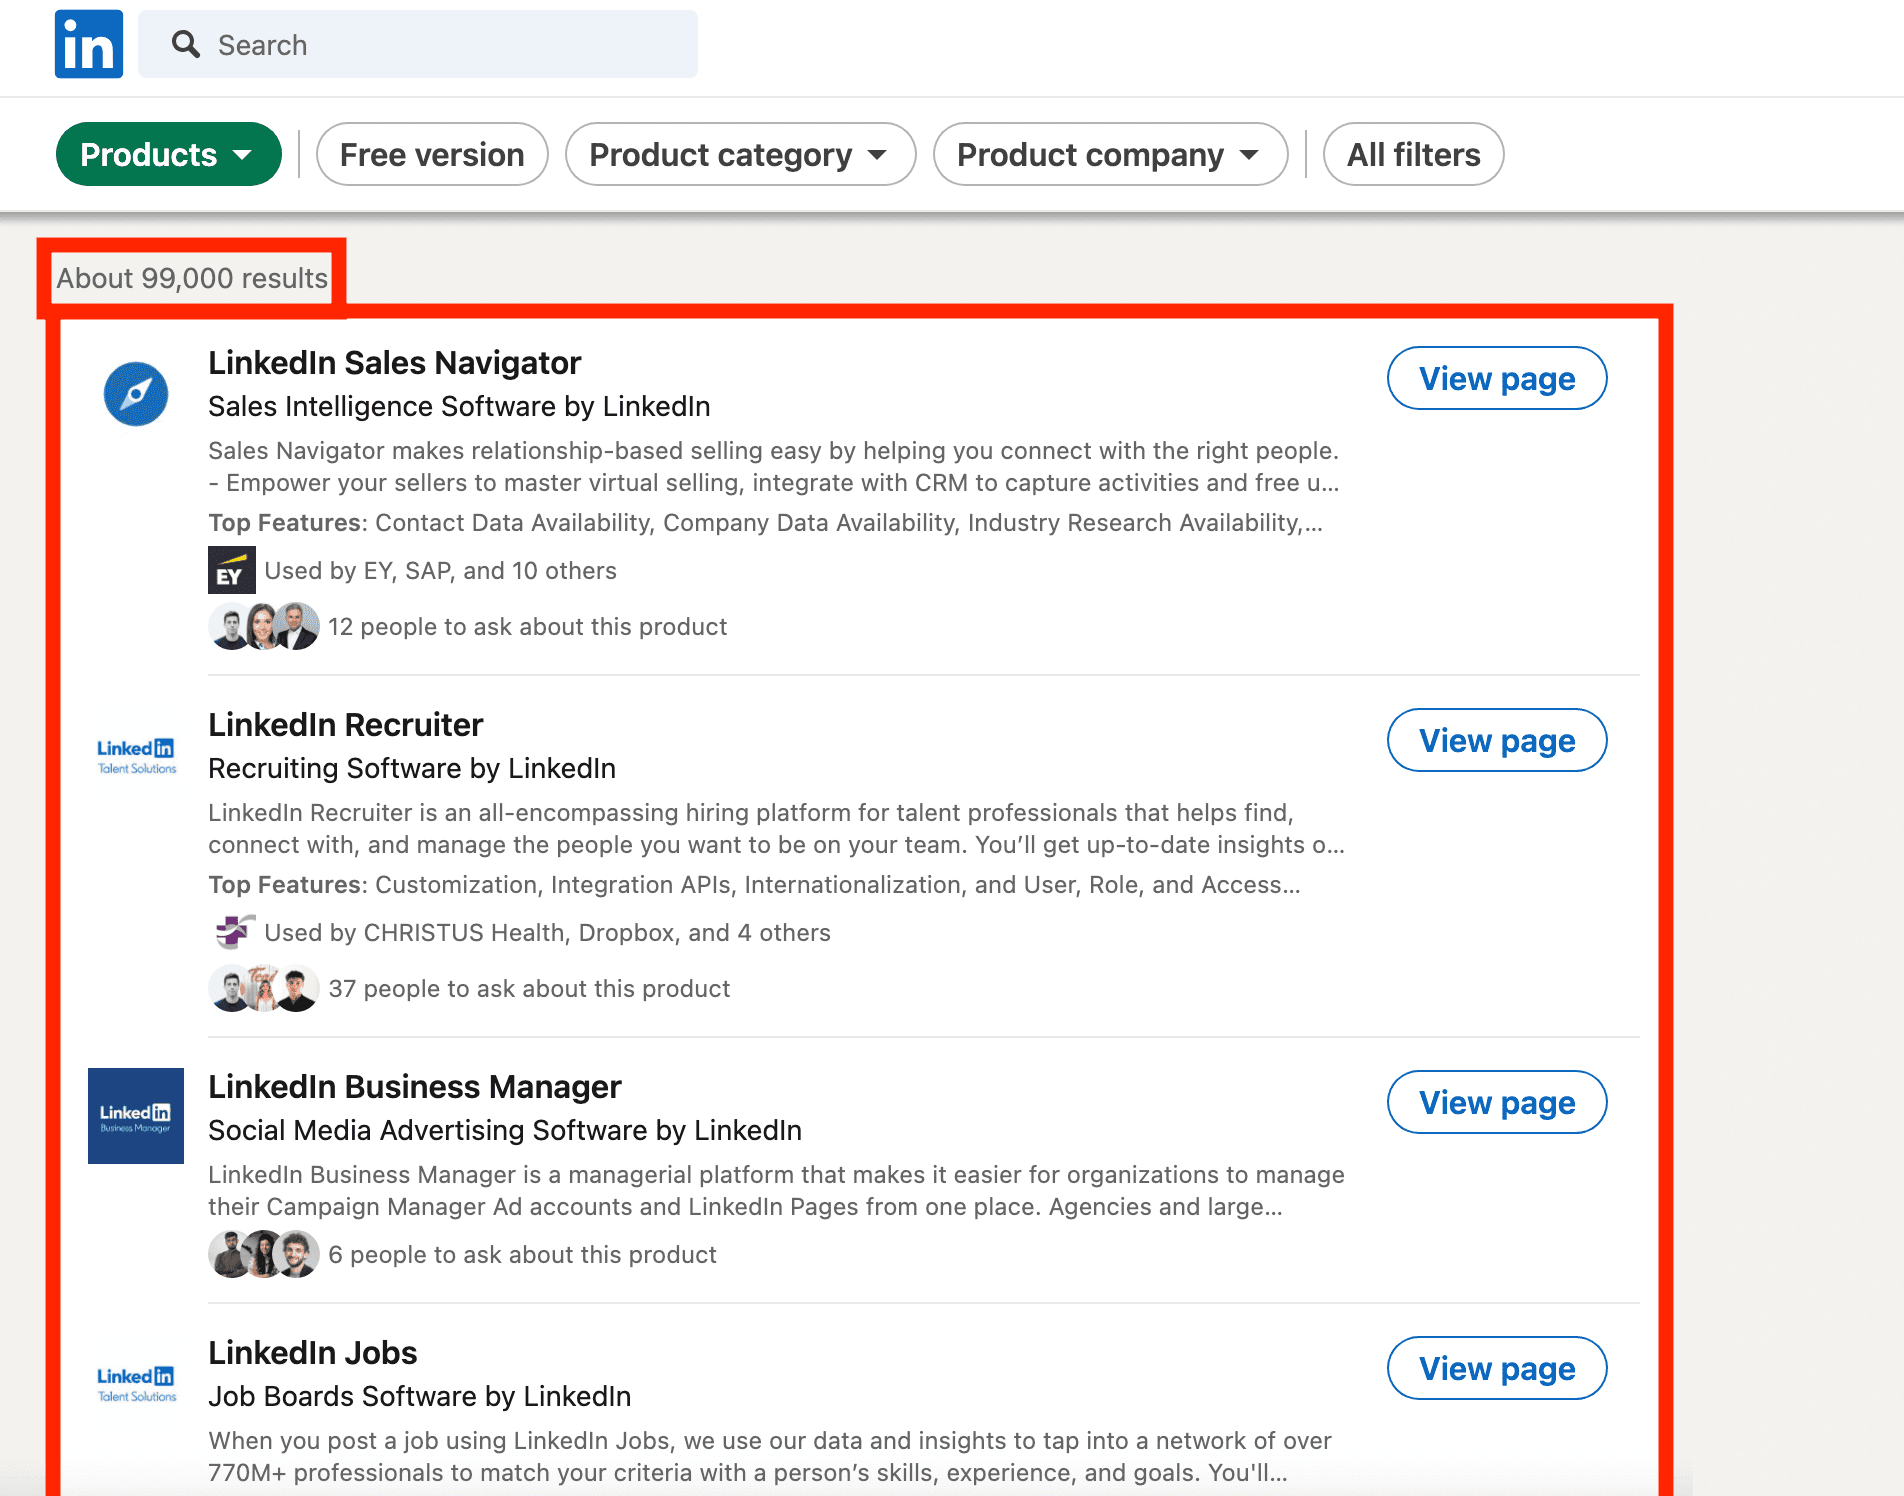 linkedin products search results no filter - image68.png